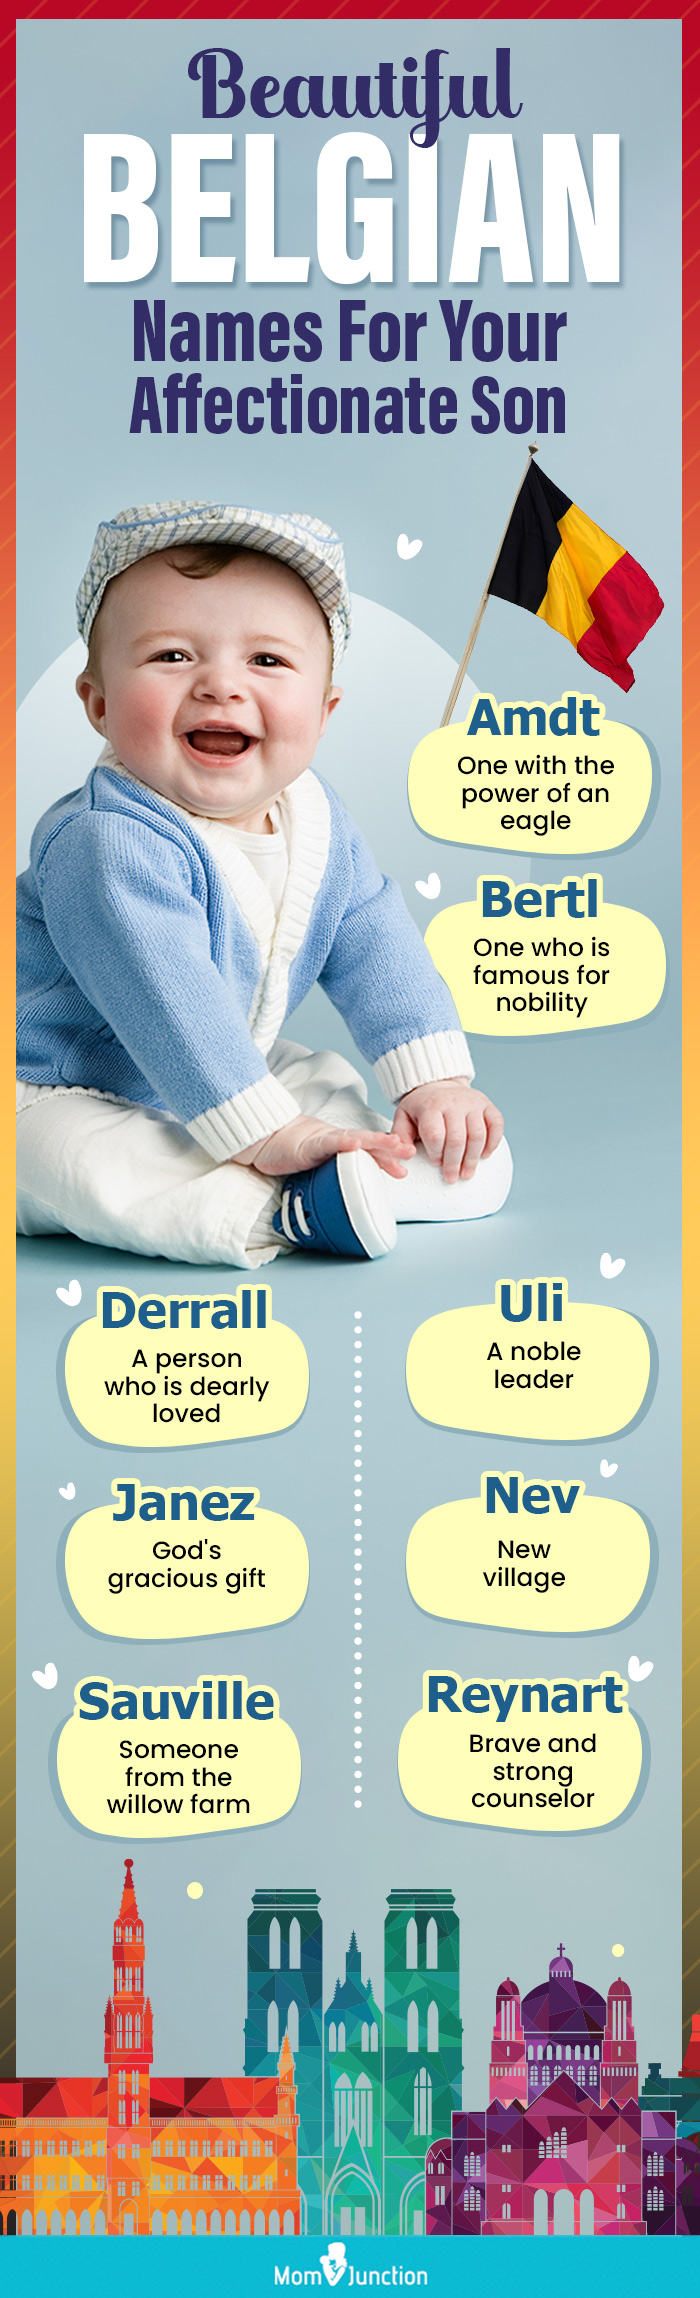 beautiful belgian names for your affectionate son (infographic)